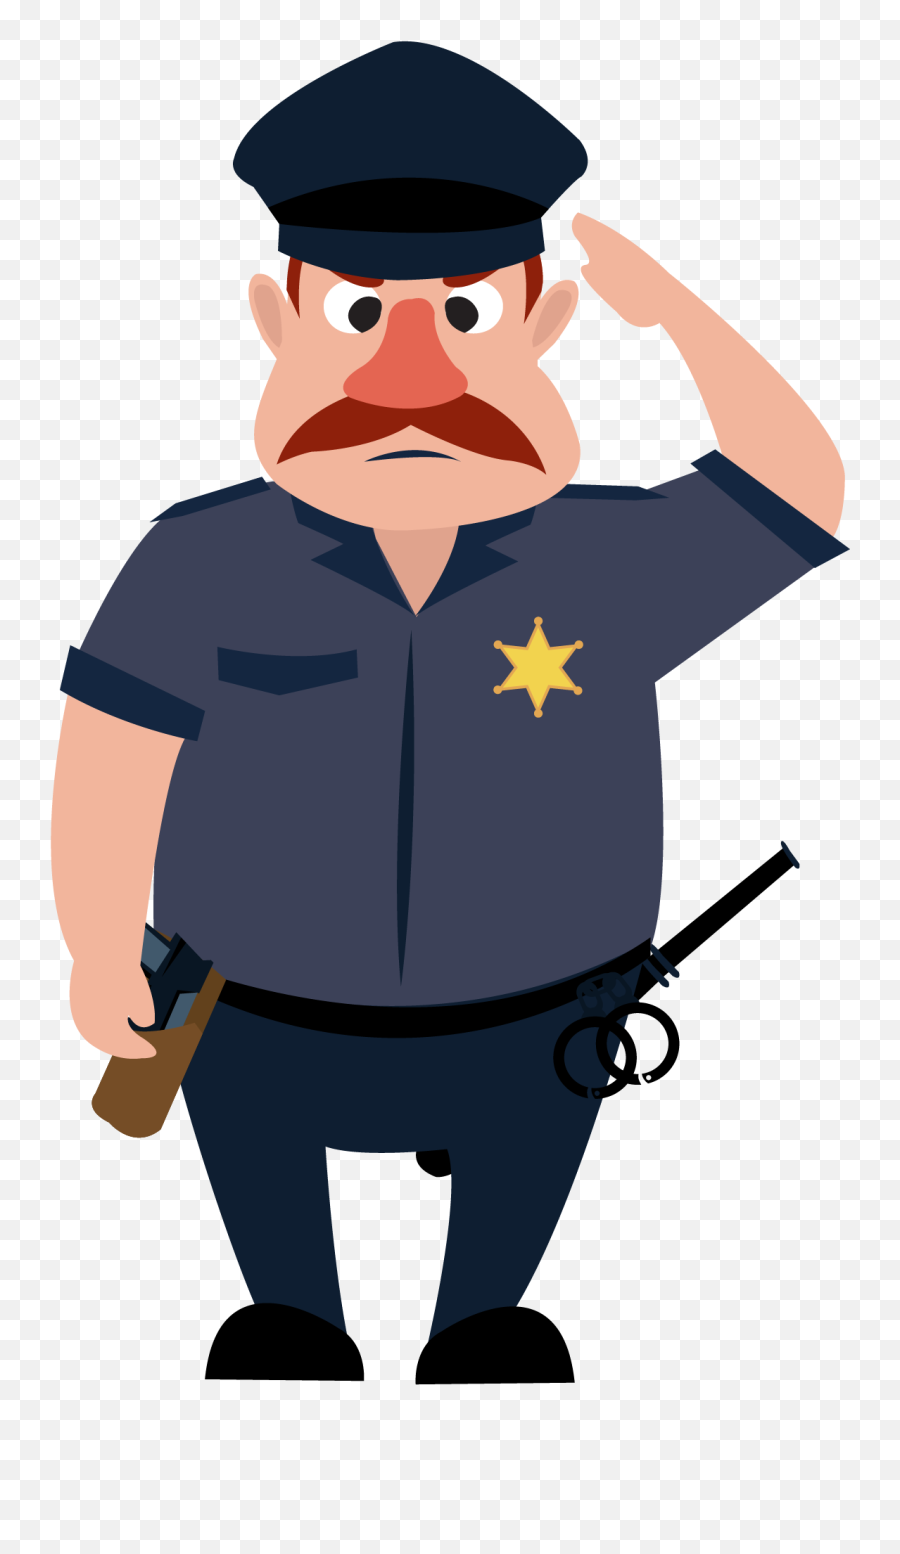 Police Officer Cartoon Png Clipart - Police Officer Cartoon Png Emoji,Police Officer Emoji